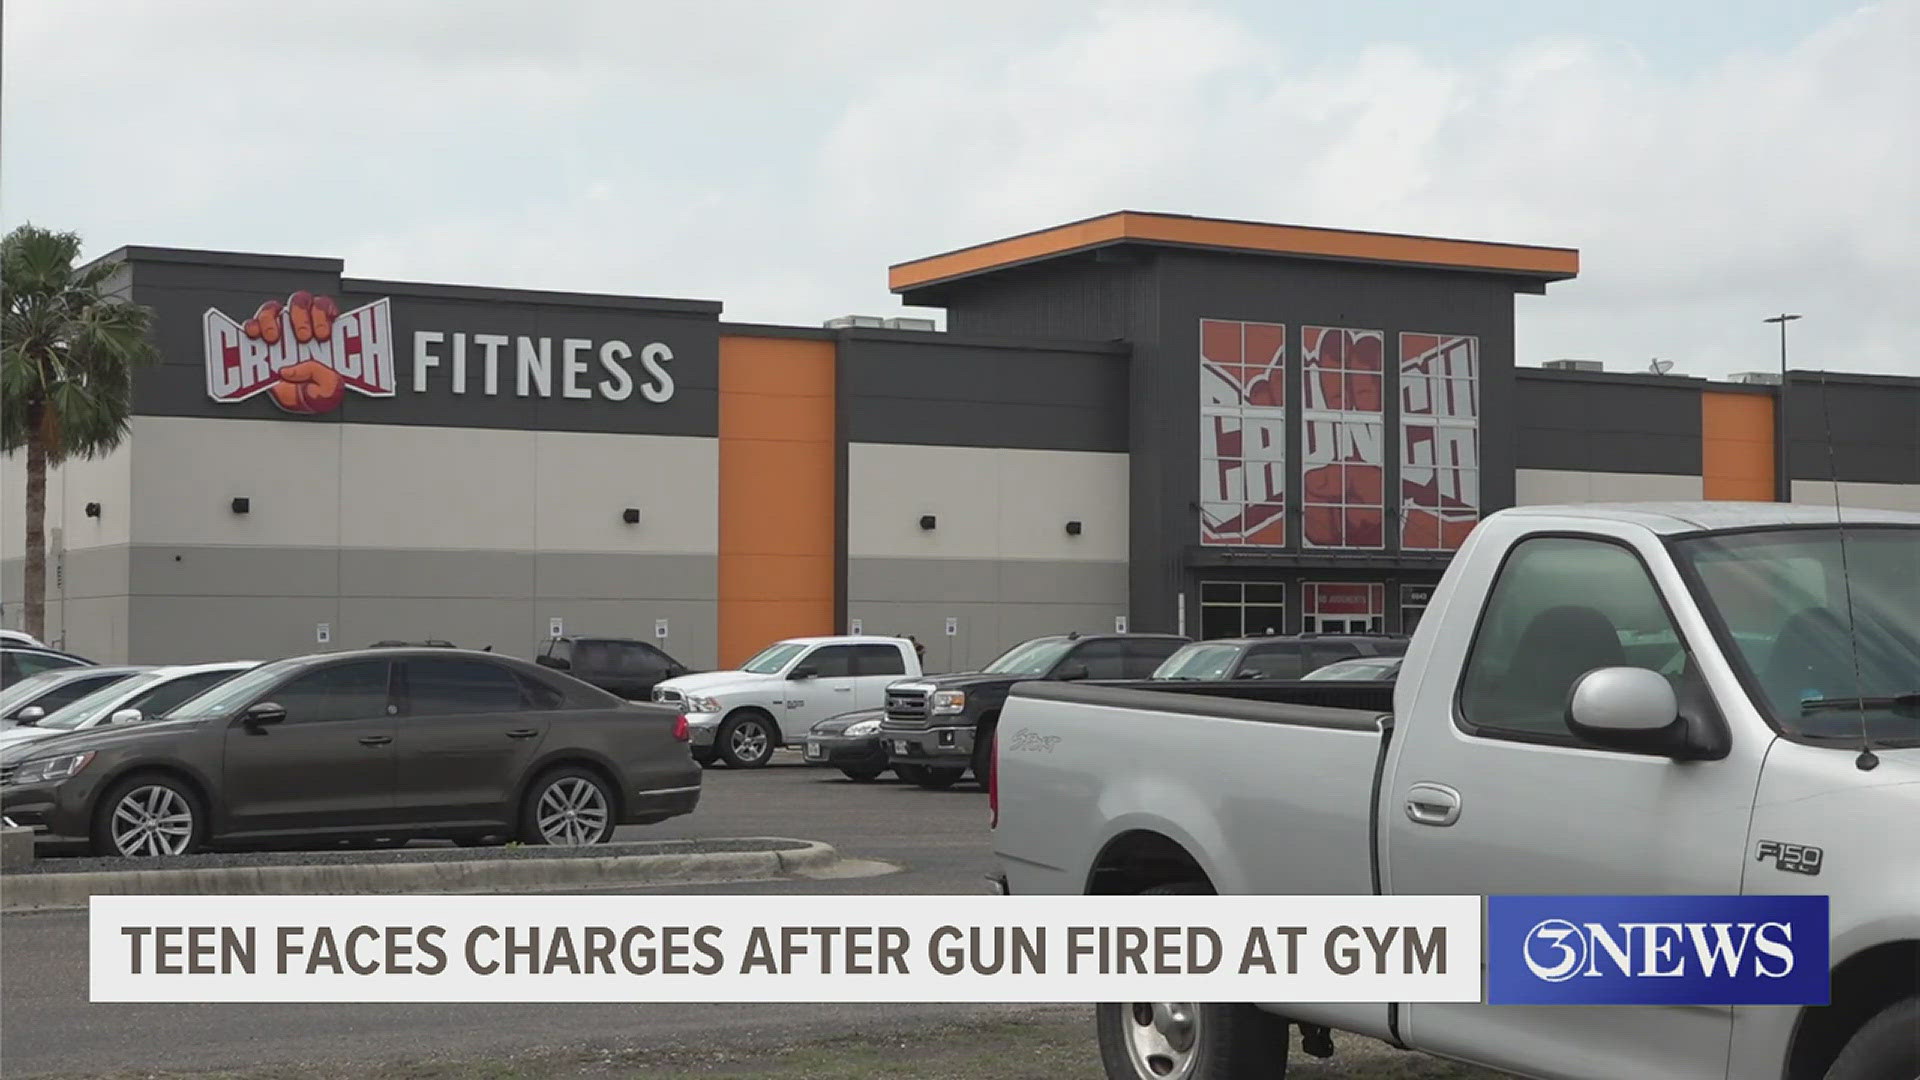 The 18-year-old told police his gun accidentally went off while he searched his gym bag.